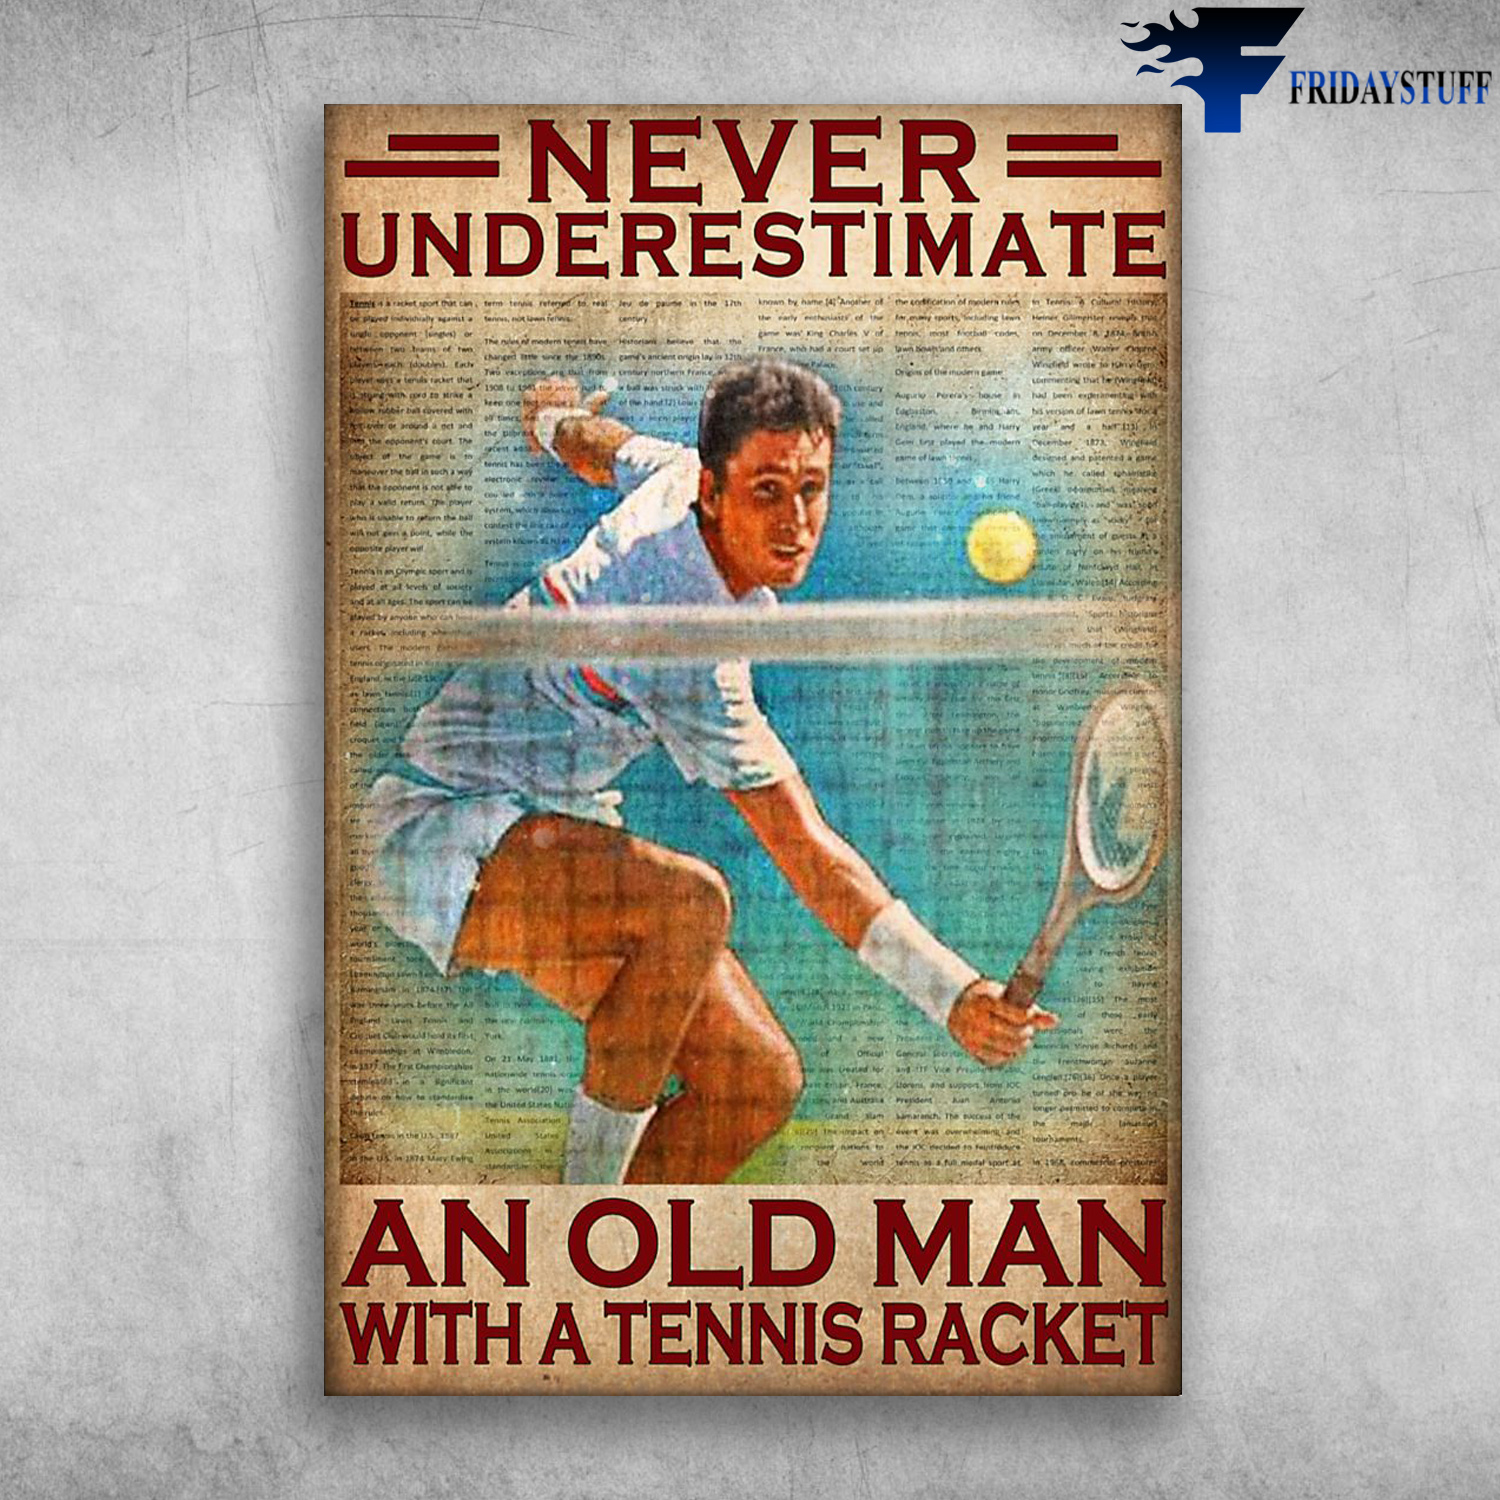 Man Playing Tennis - Never Underestimate, An Old Man With A Tennis Racket